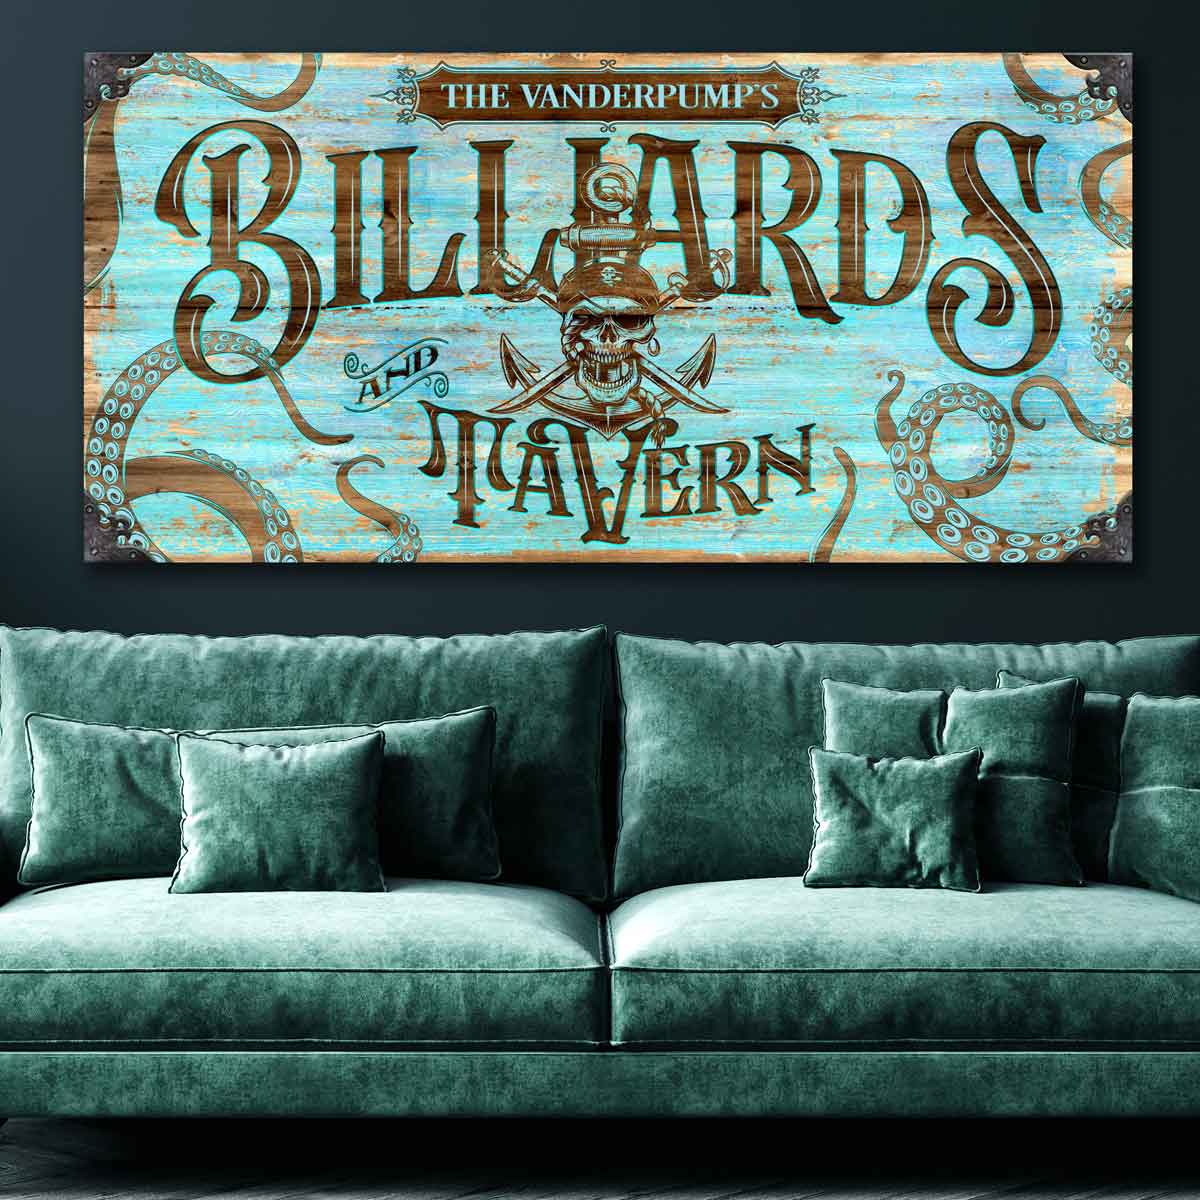 Billiard Signs, Custom Wall Art, Tavern Sign, Pool Room Art - Blue washed sign with pirate and words Billiards and tavern with octopus arms